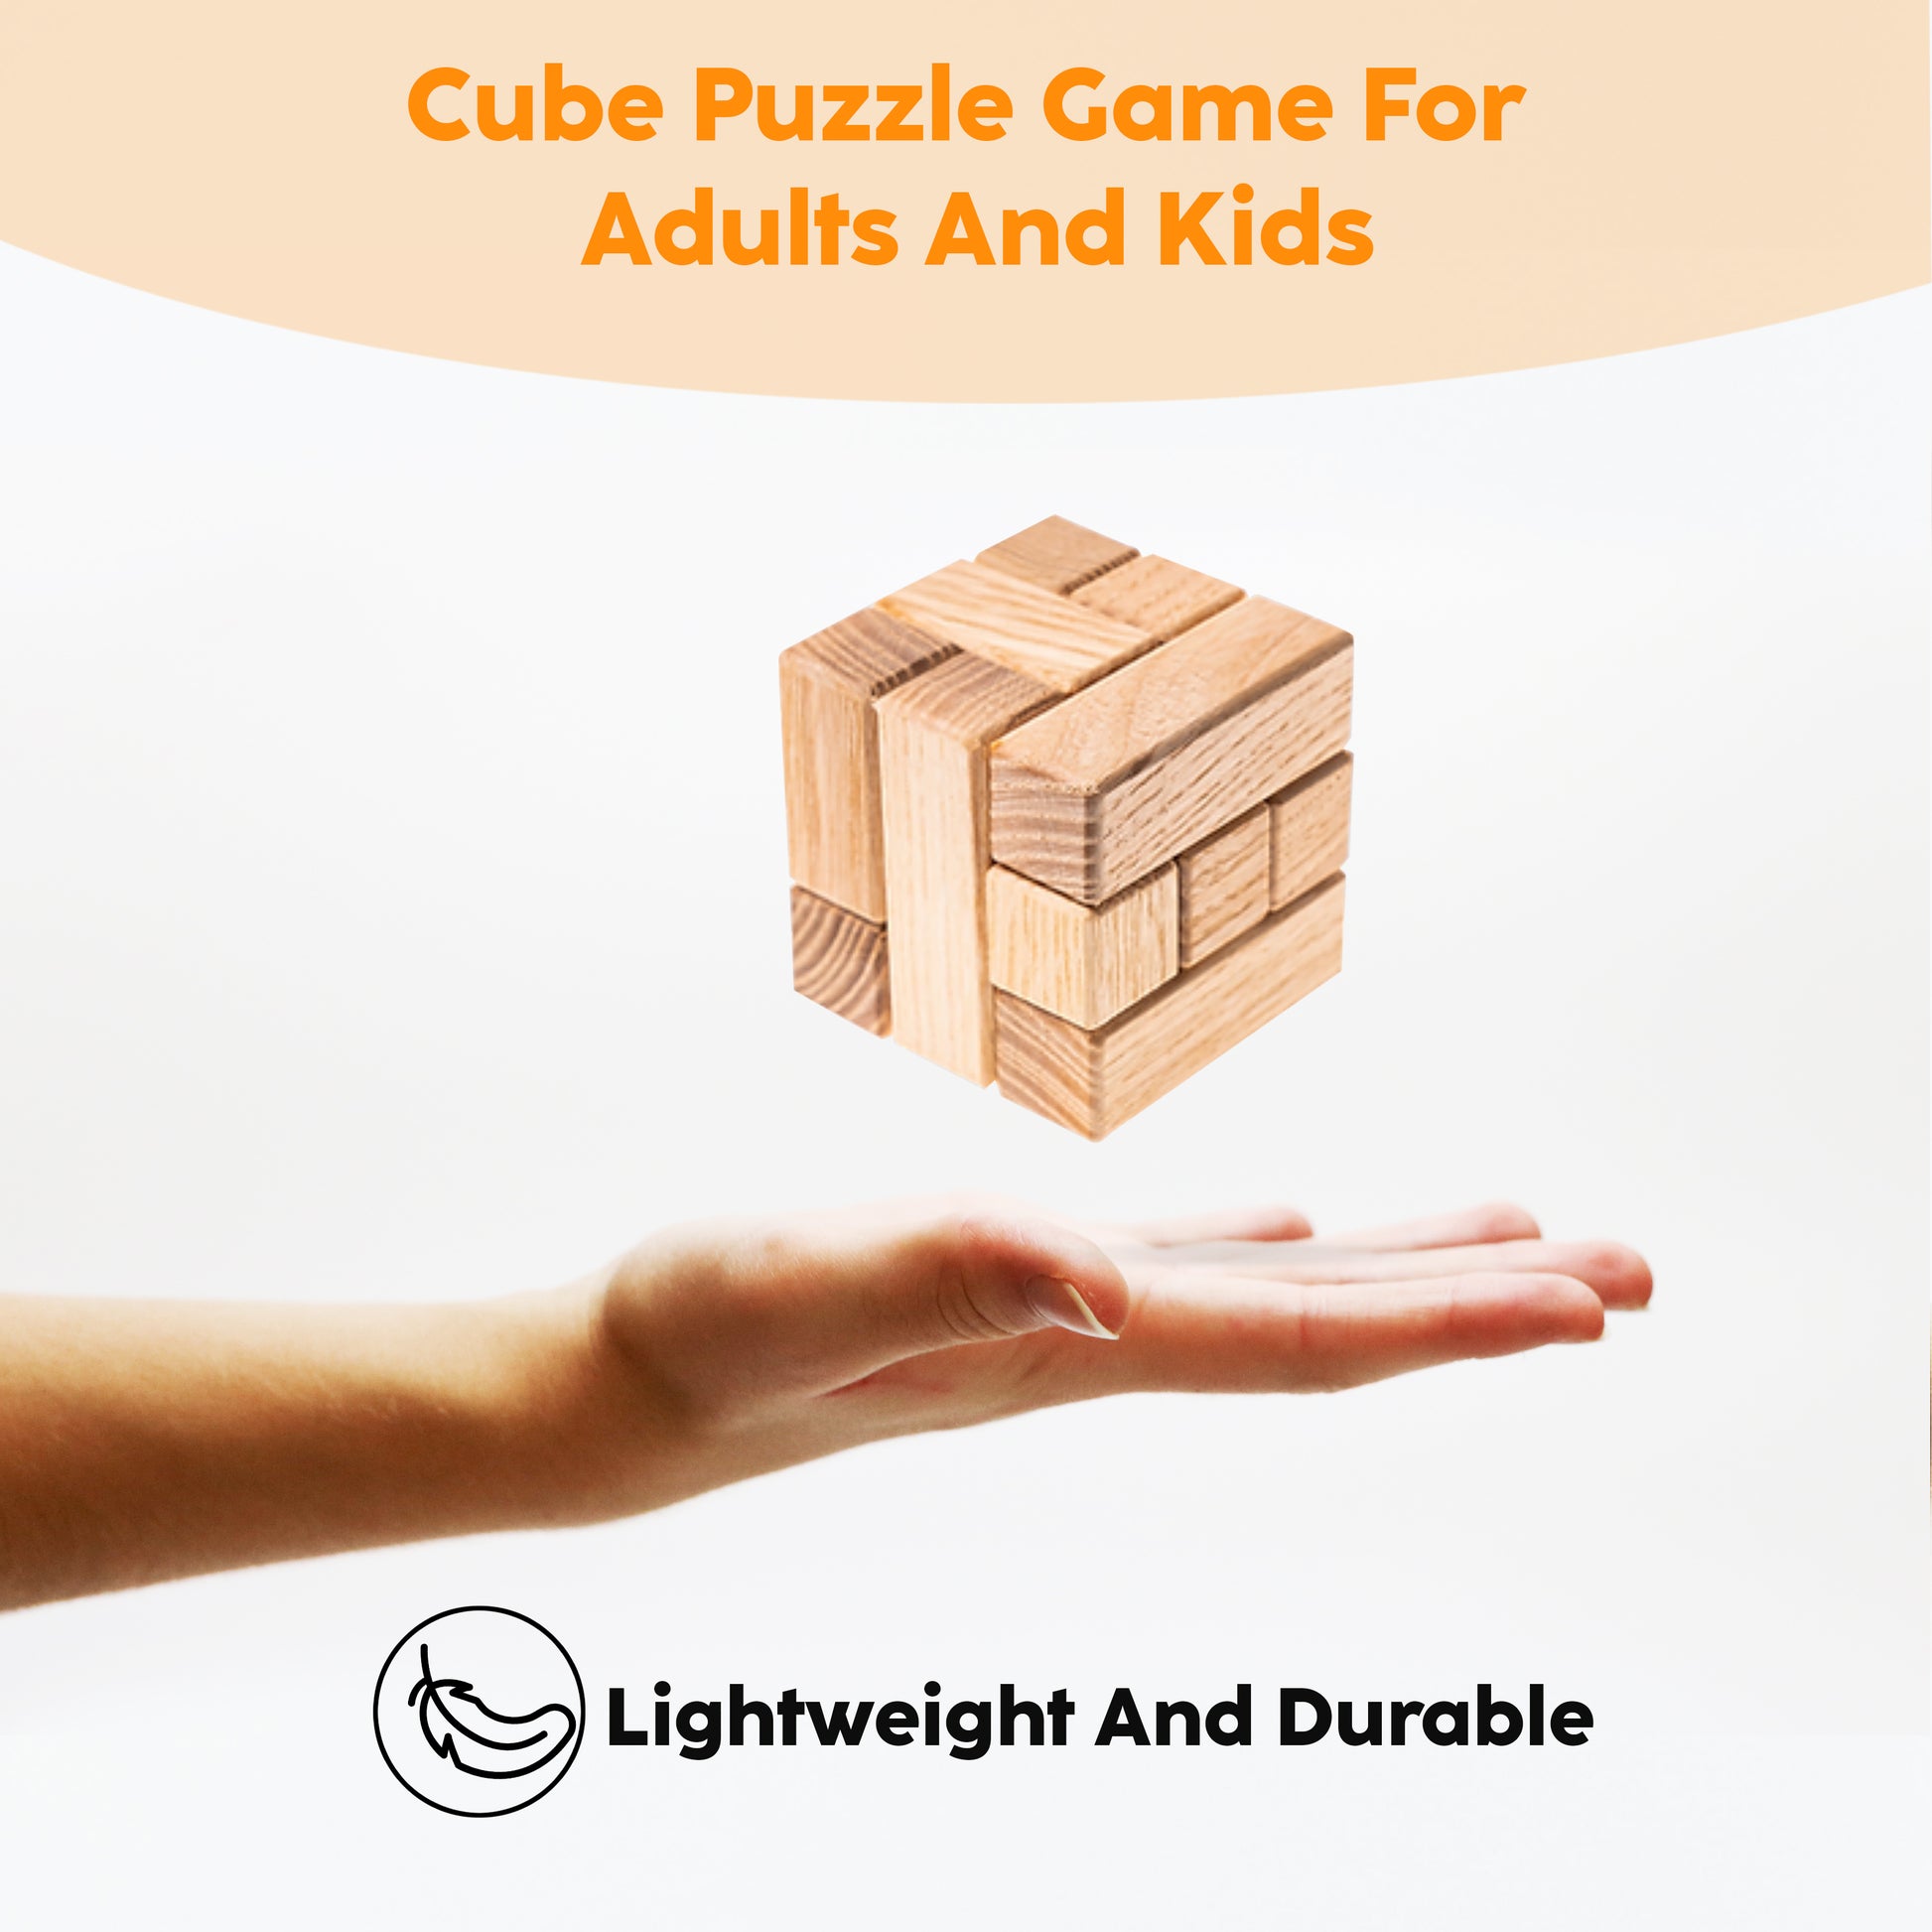 3D Puzzles IQ Puzzle Brain Teaser Wooden Cube 54T Luban Lock Inter  Educational Rompecabezas Toy De Madera Ingenio Brinquedos Juguetesn240106  From Nostalgie, $21.91